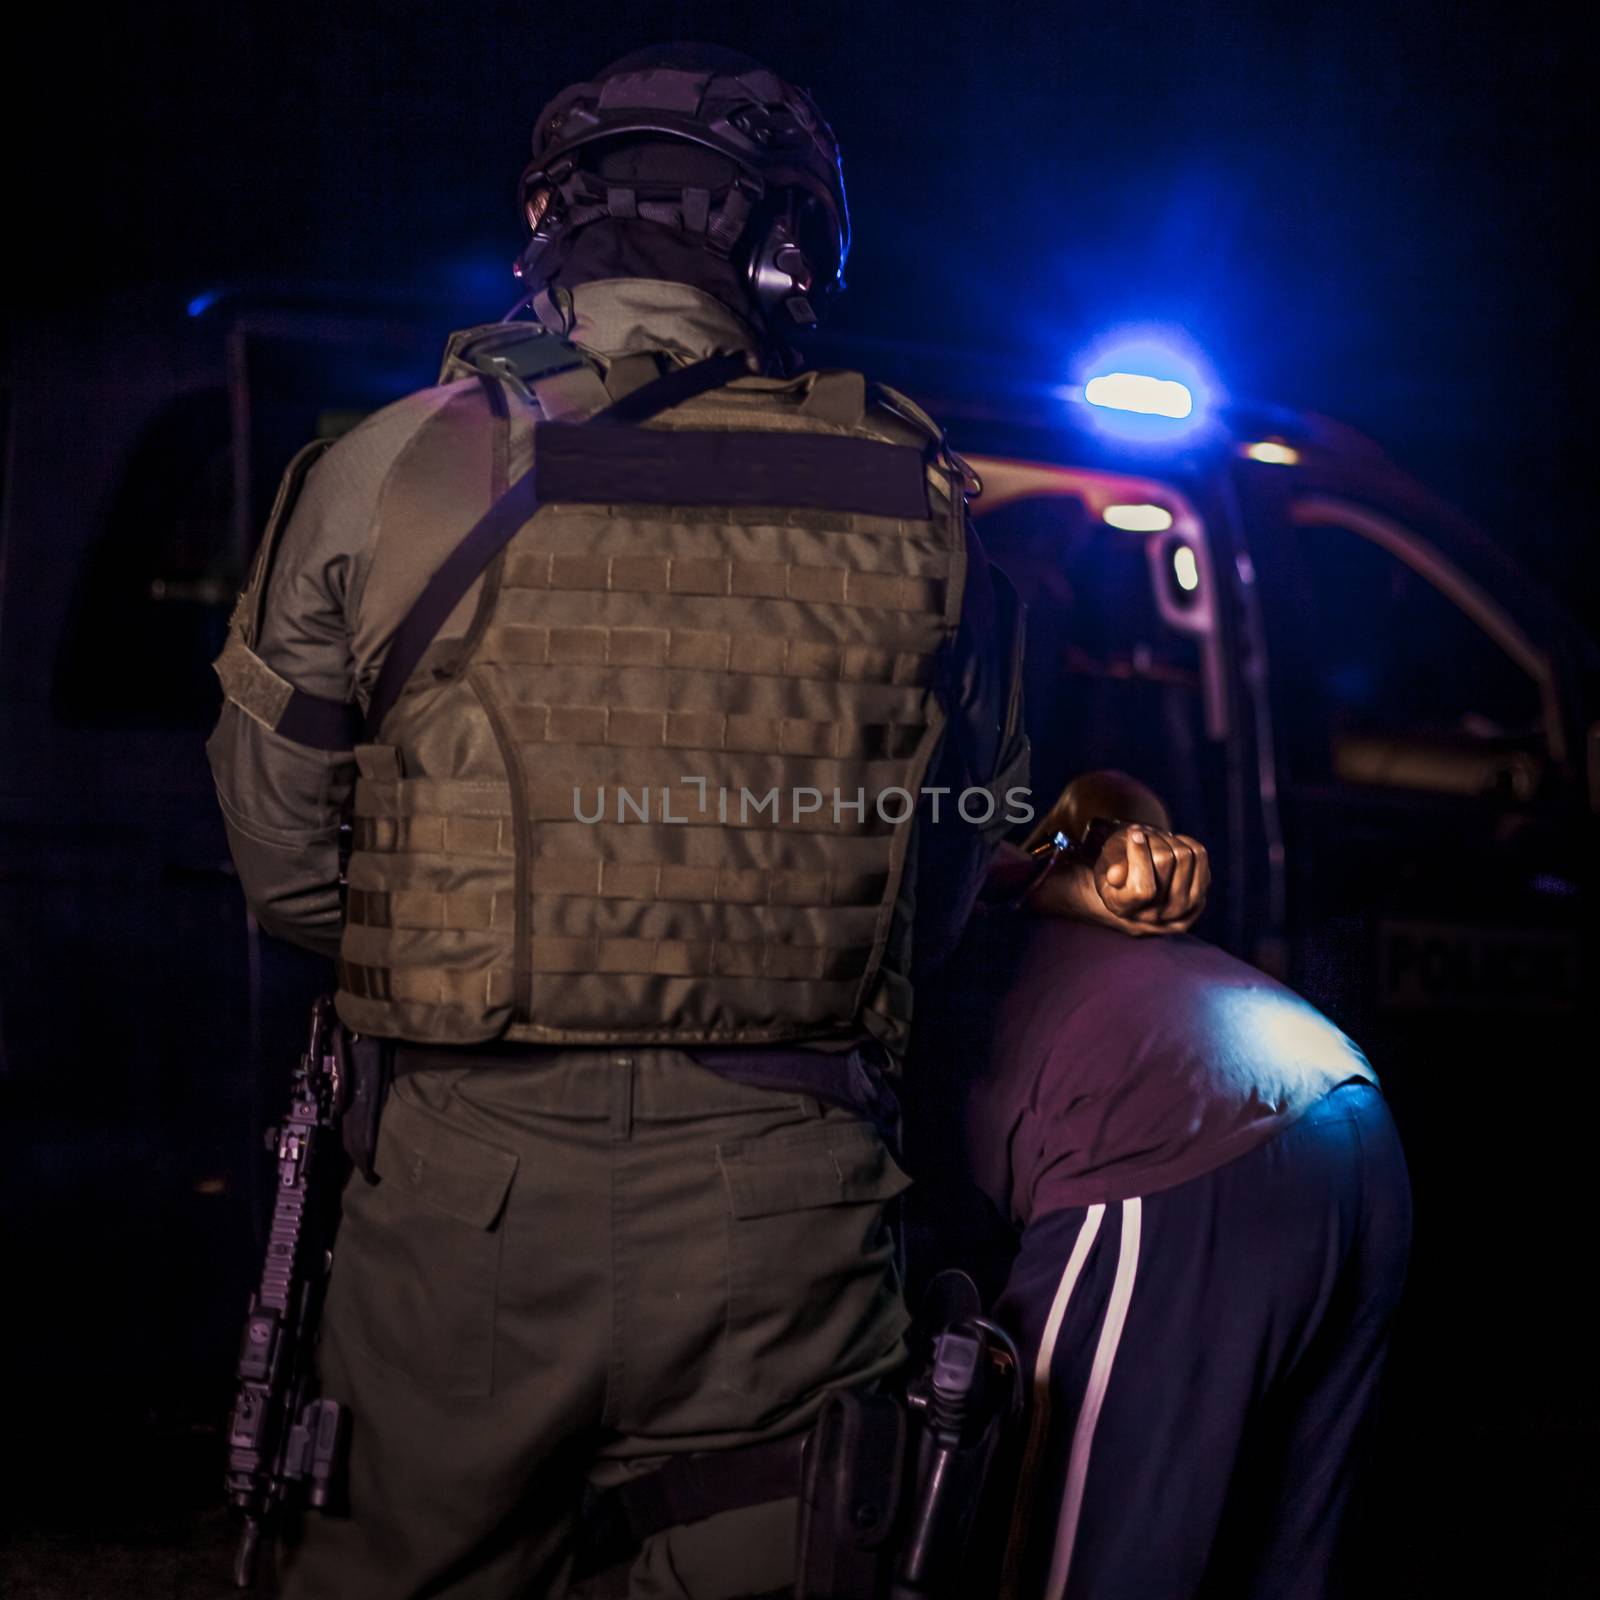 A police officer puts handcuffs on a criminal's hands during an arrest. Police car with flashing lighthouses by Edophoto